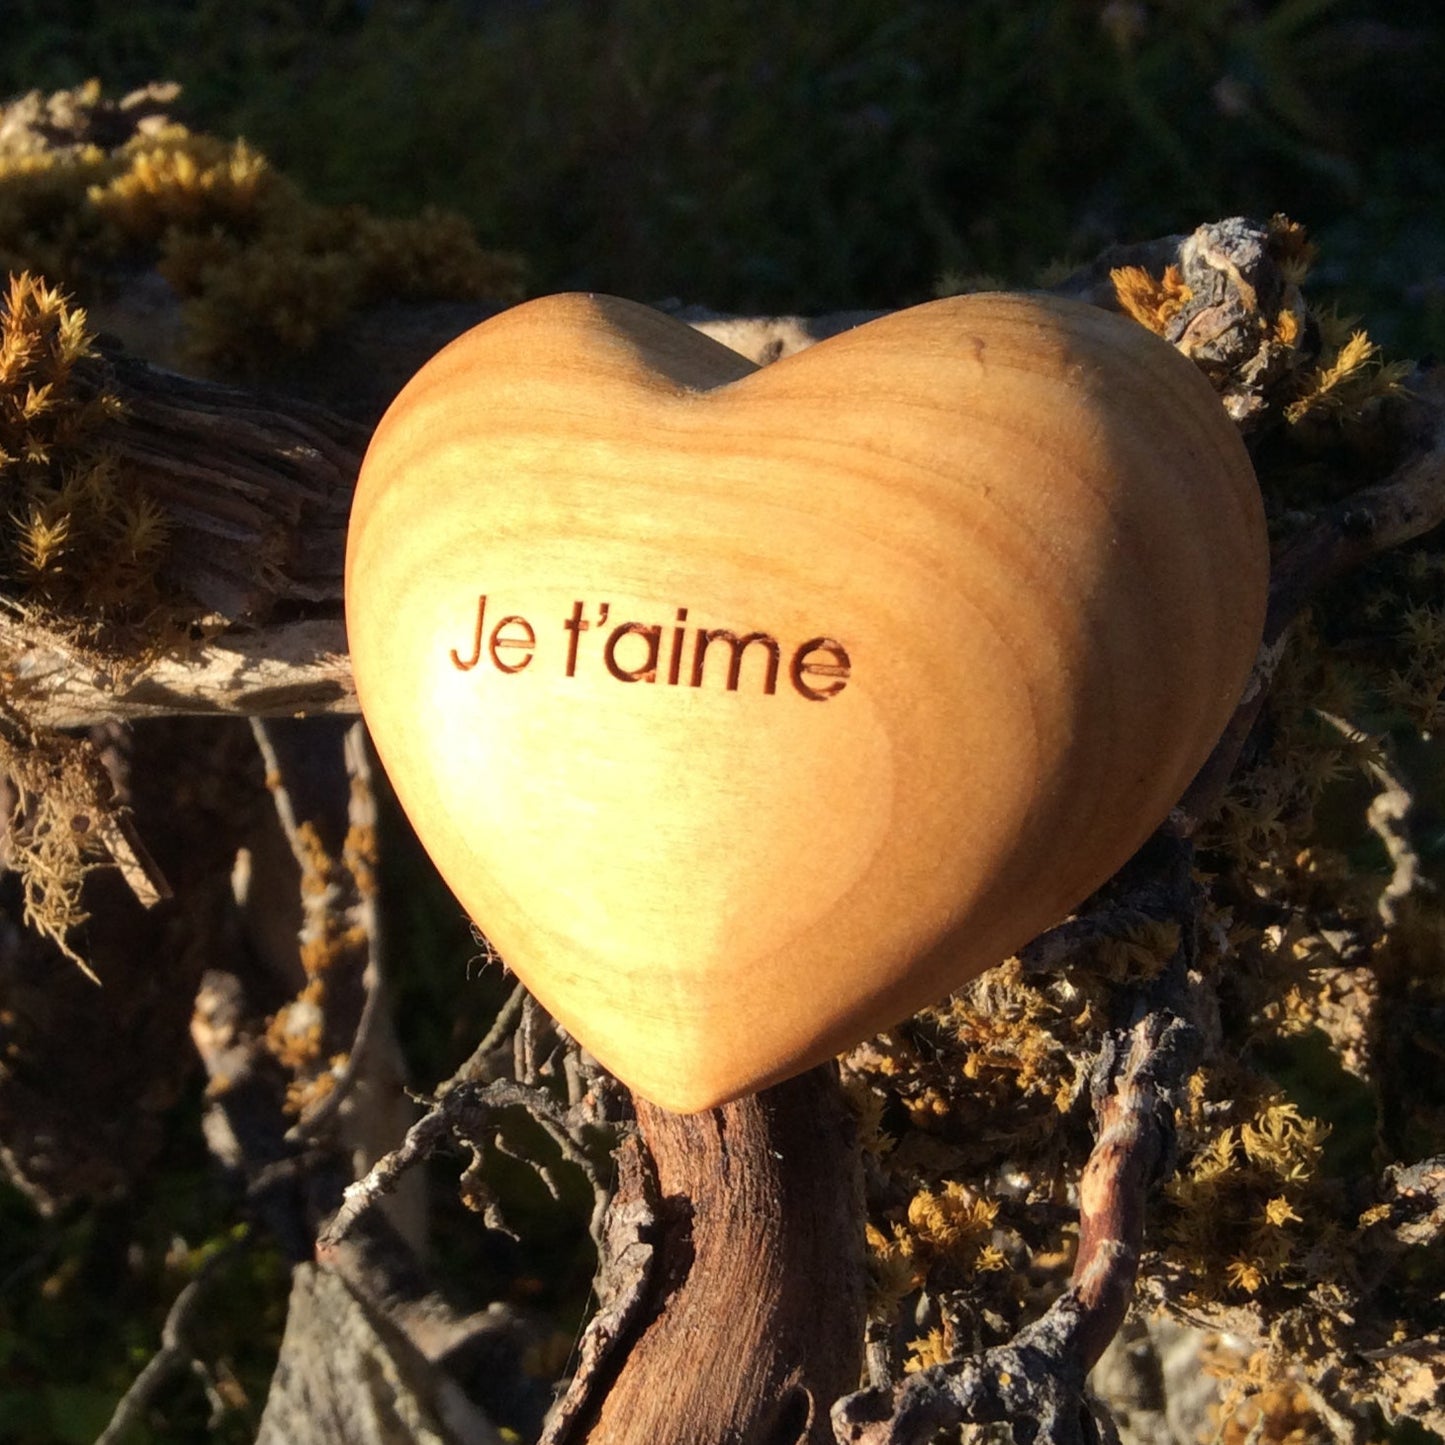 Thankgood's wooden heart Je t'aime